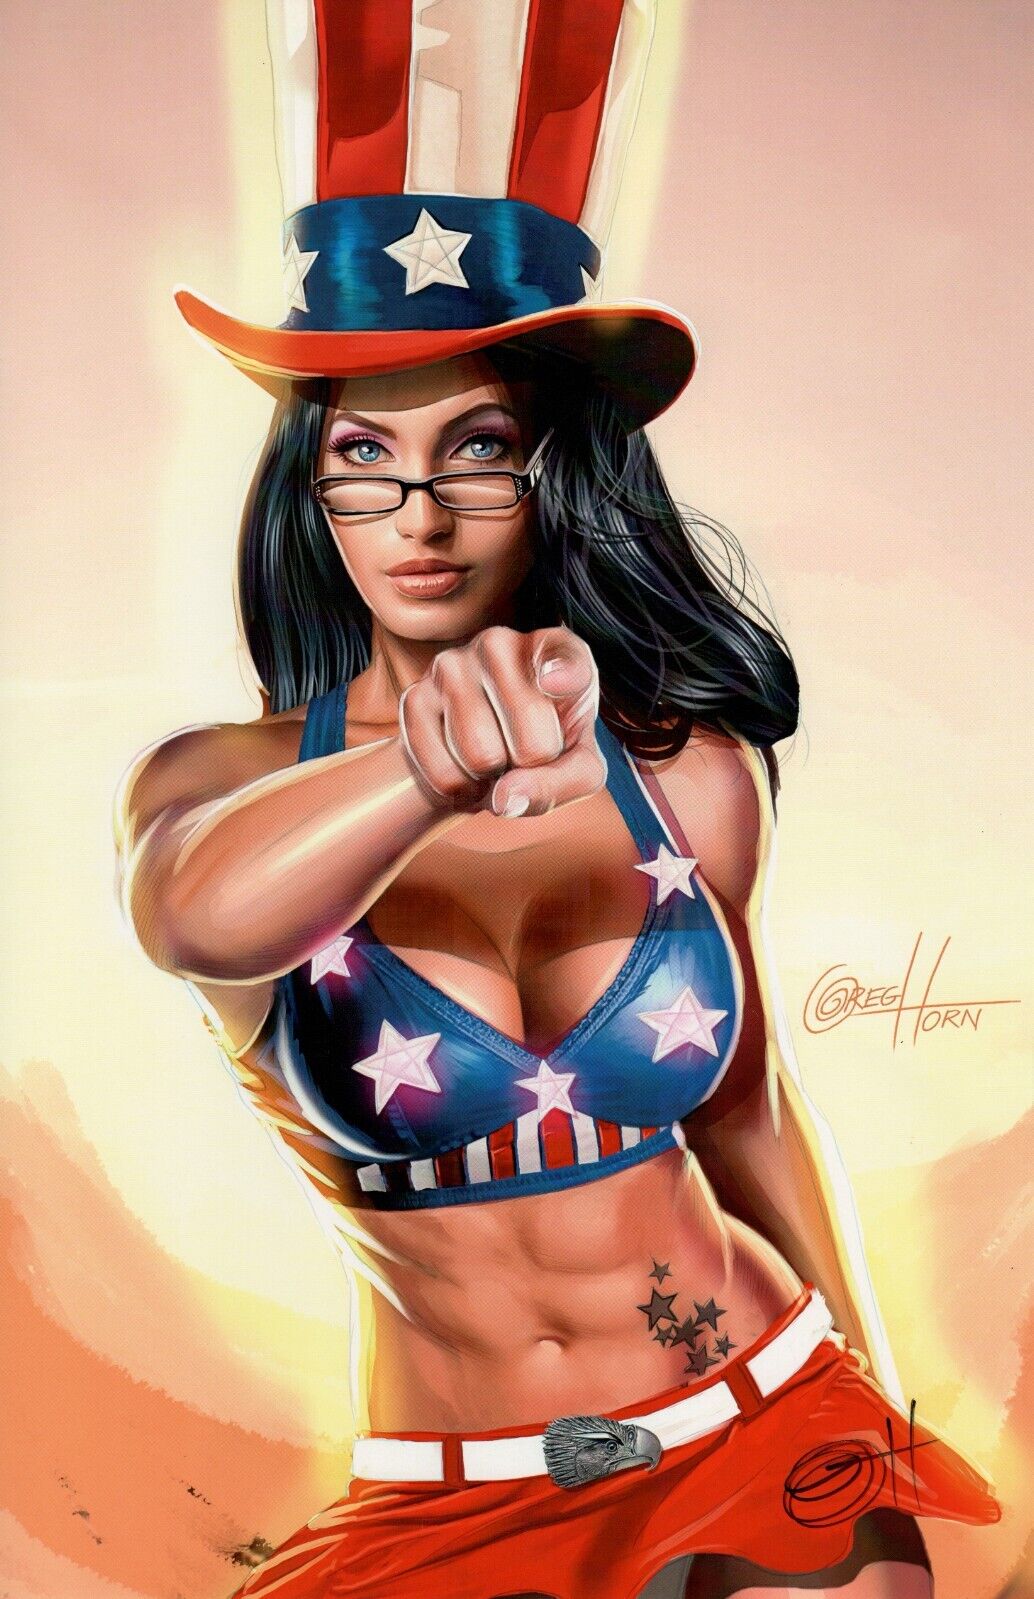 MISS LIBERTY UNCLE SAM SEXY ART PRINT SIGNED BY GREG HORN 11X17 OOP PIN UP